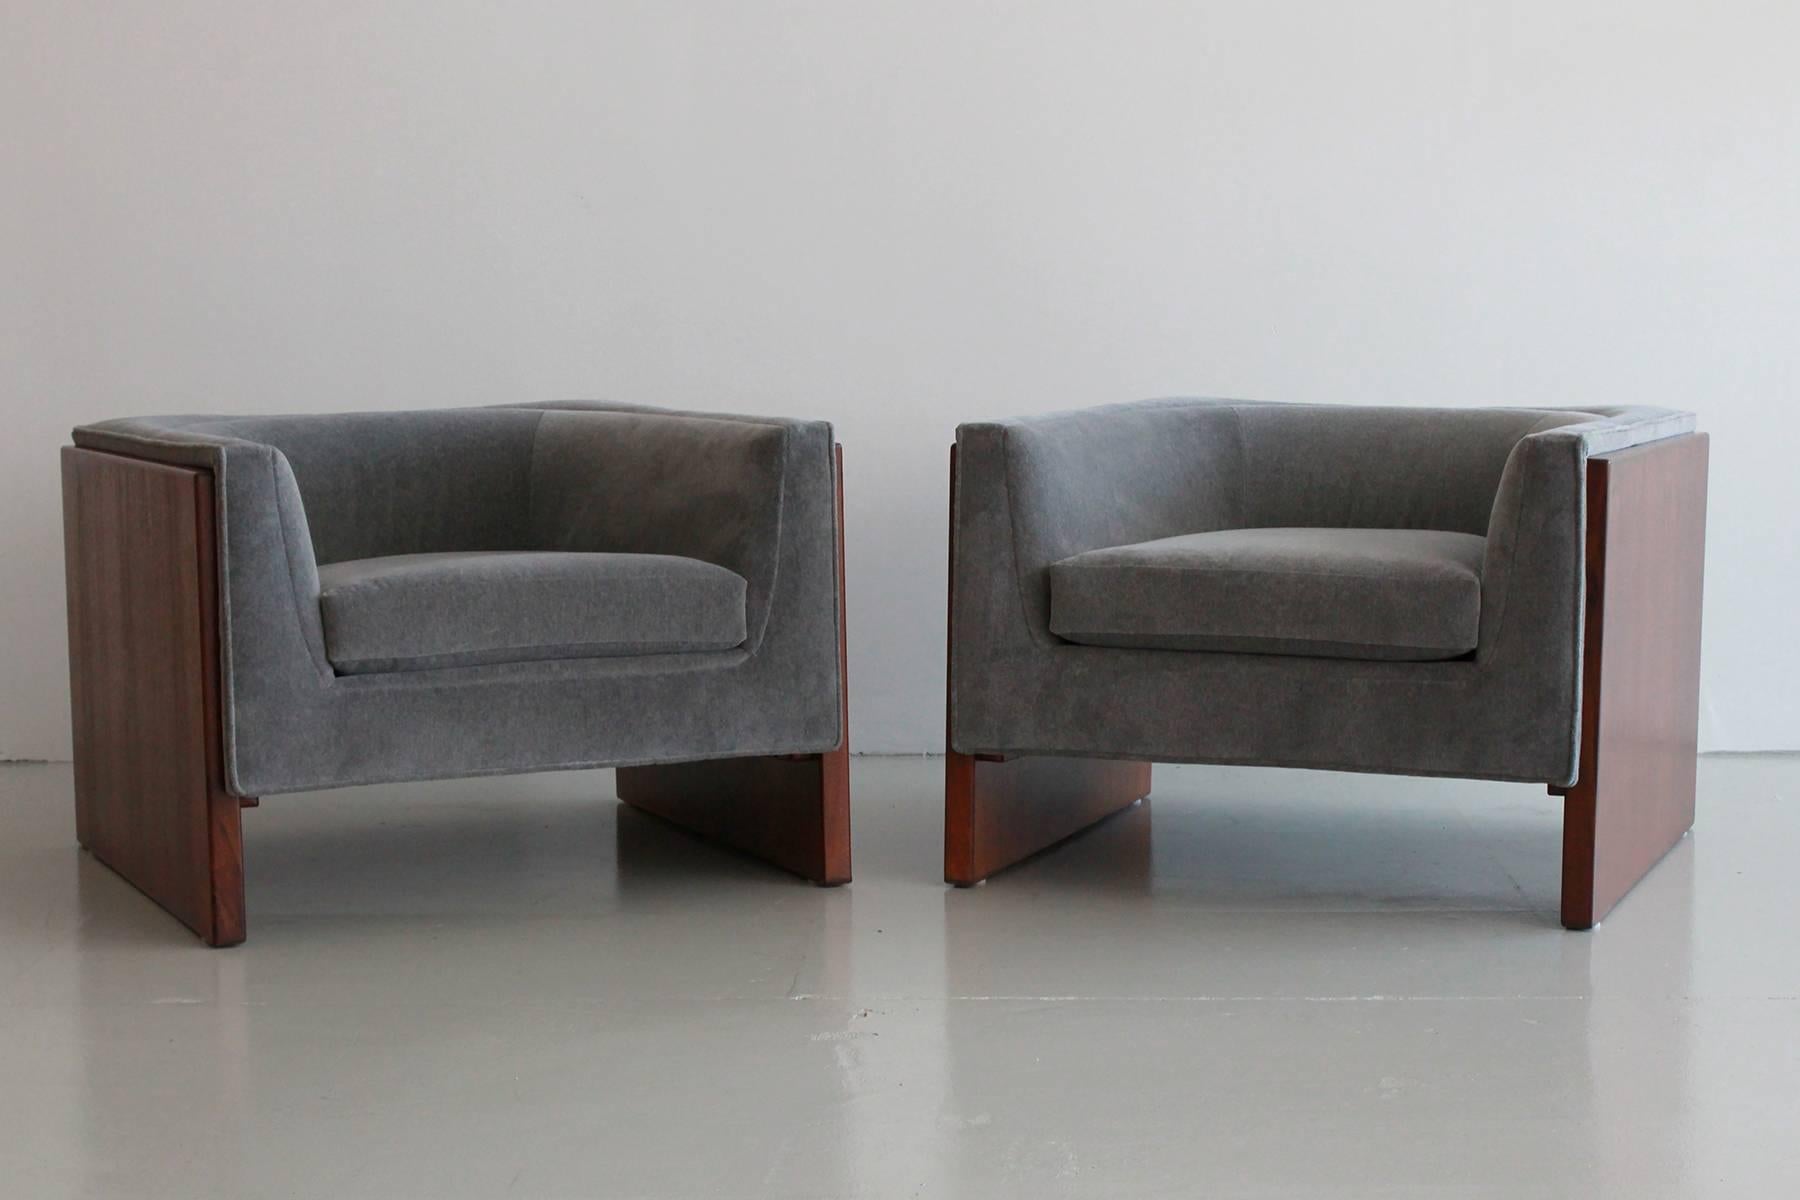 Wonderful pair of cube club chairs by Thayer Coggin attributed to Milo Baughman. Walnut sides create a floating effect and chairs have been refinished and reupholstered in heather grey velvet.